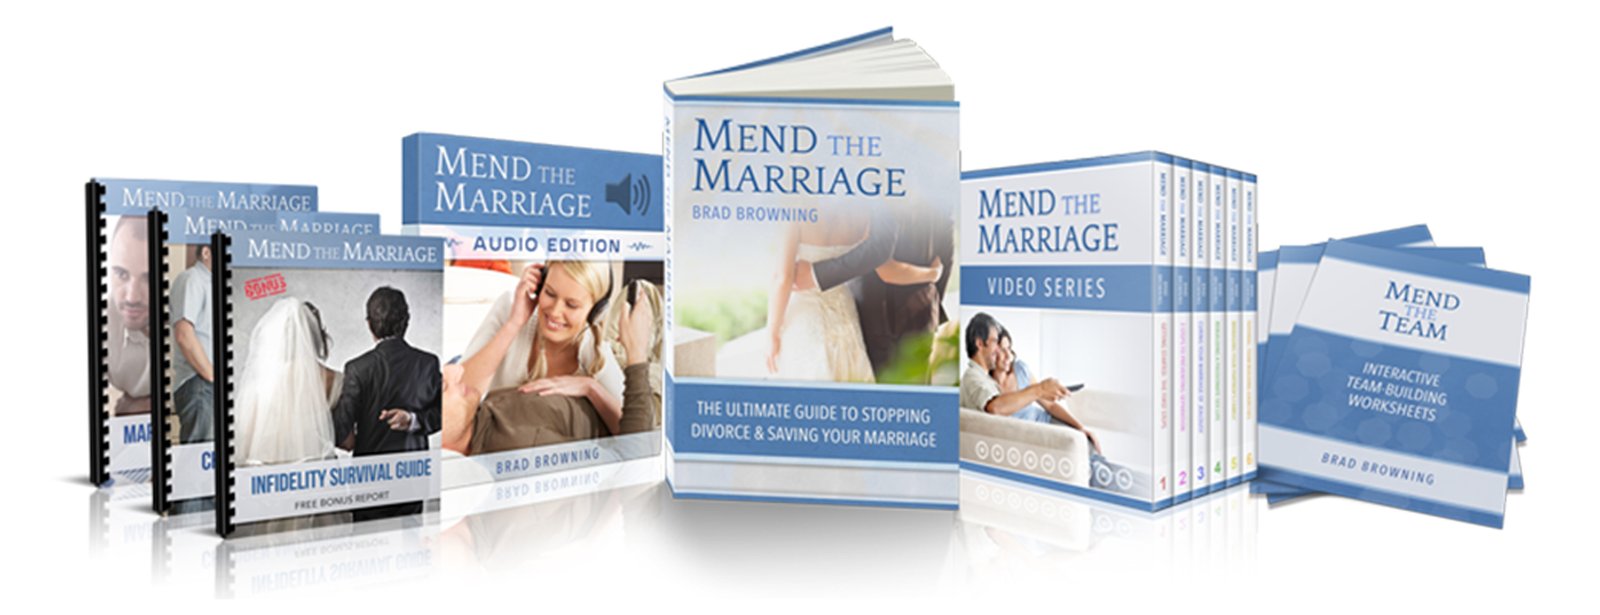 Mend The Marriage review